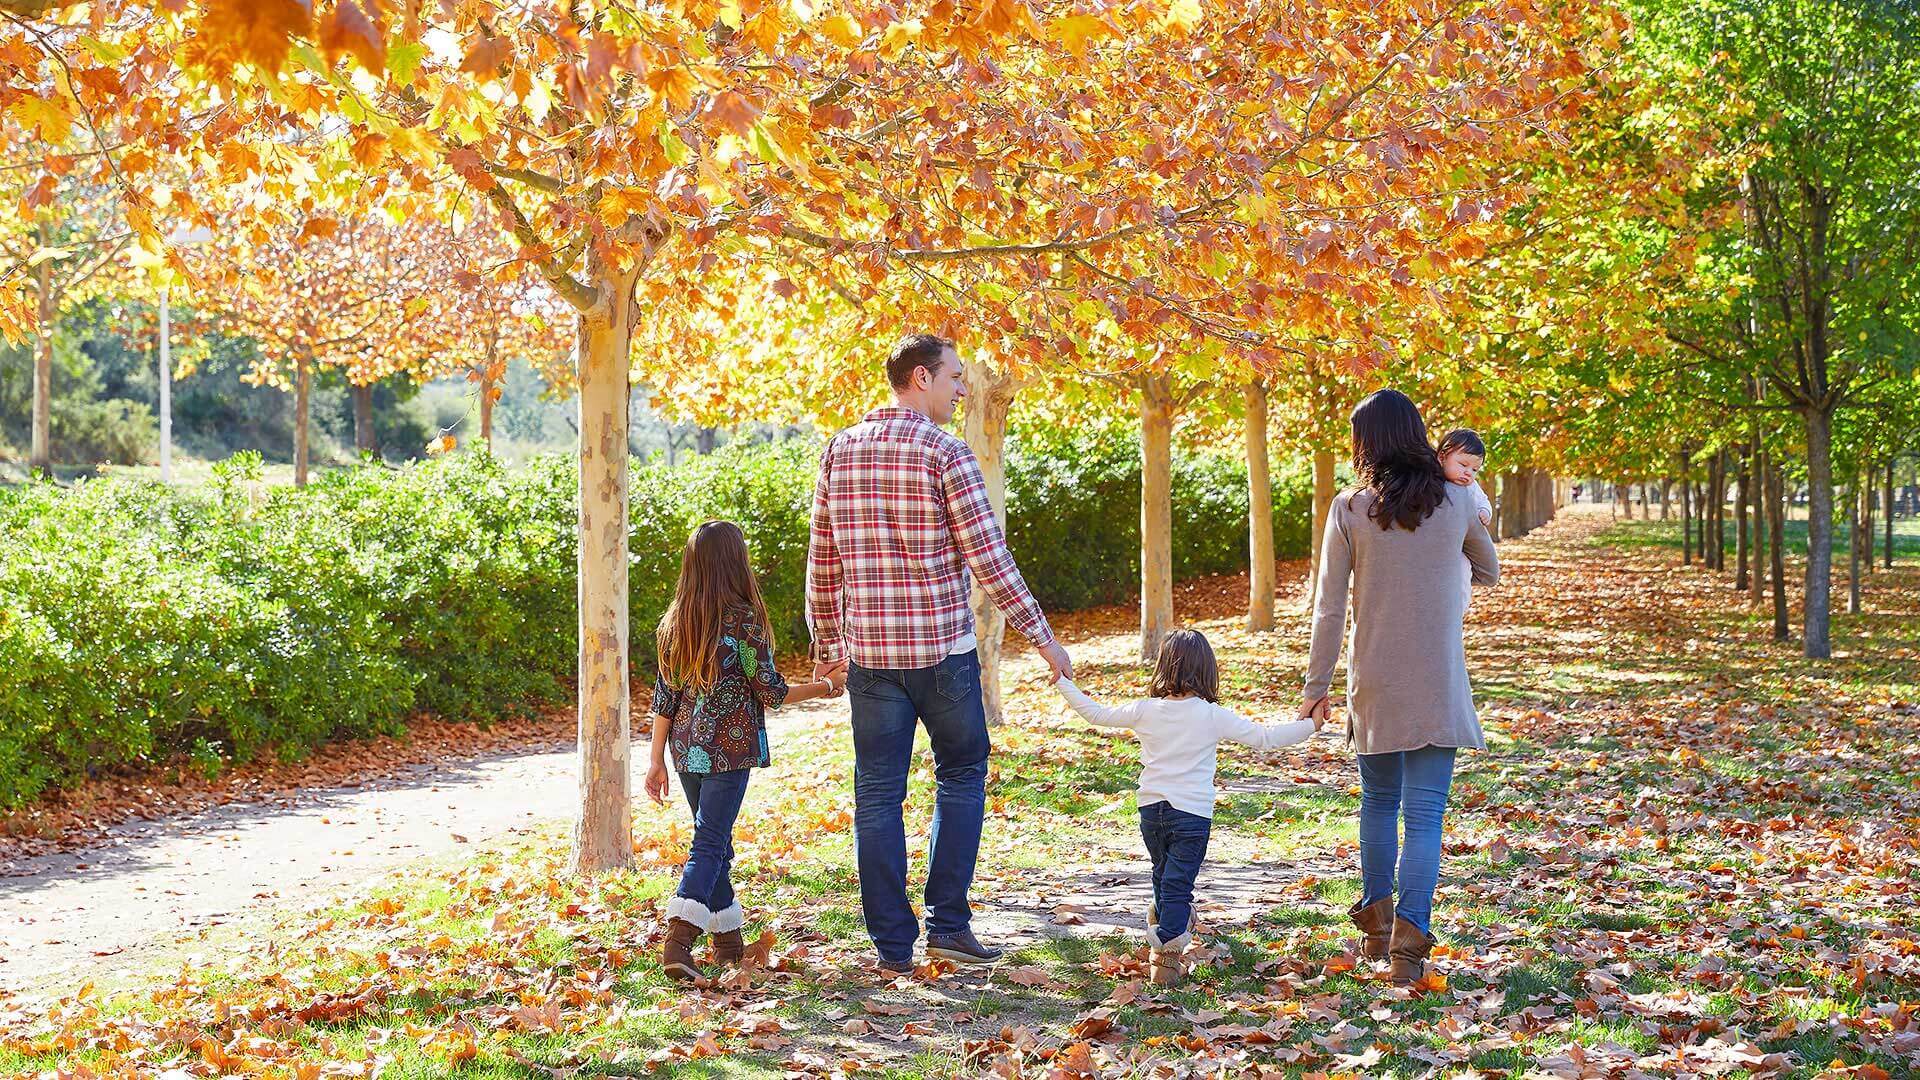 Family Walking In An Autumn Park